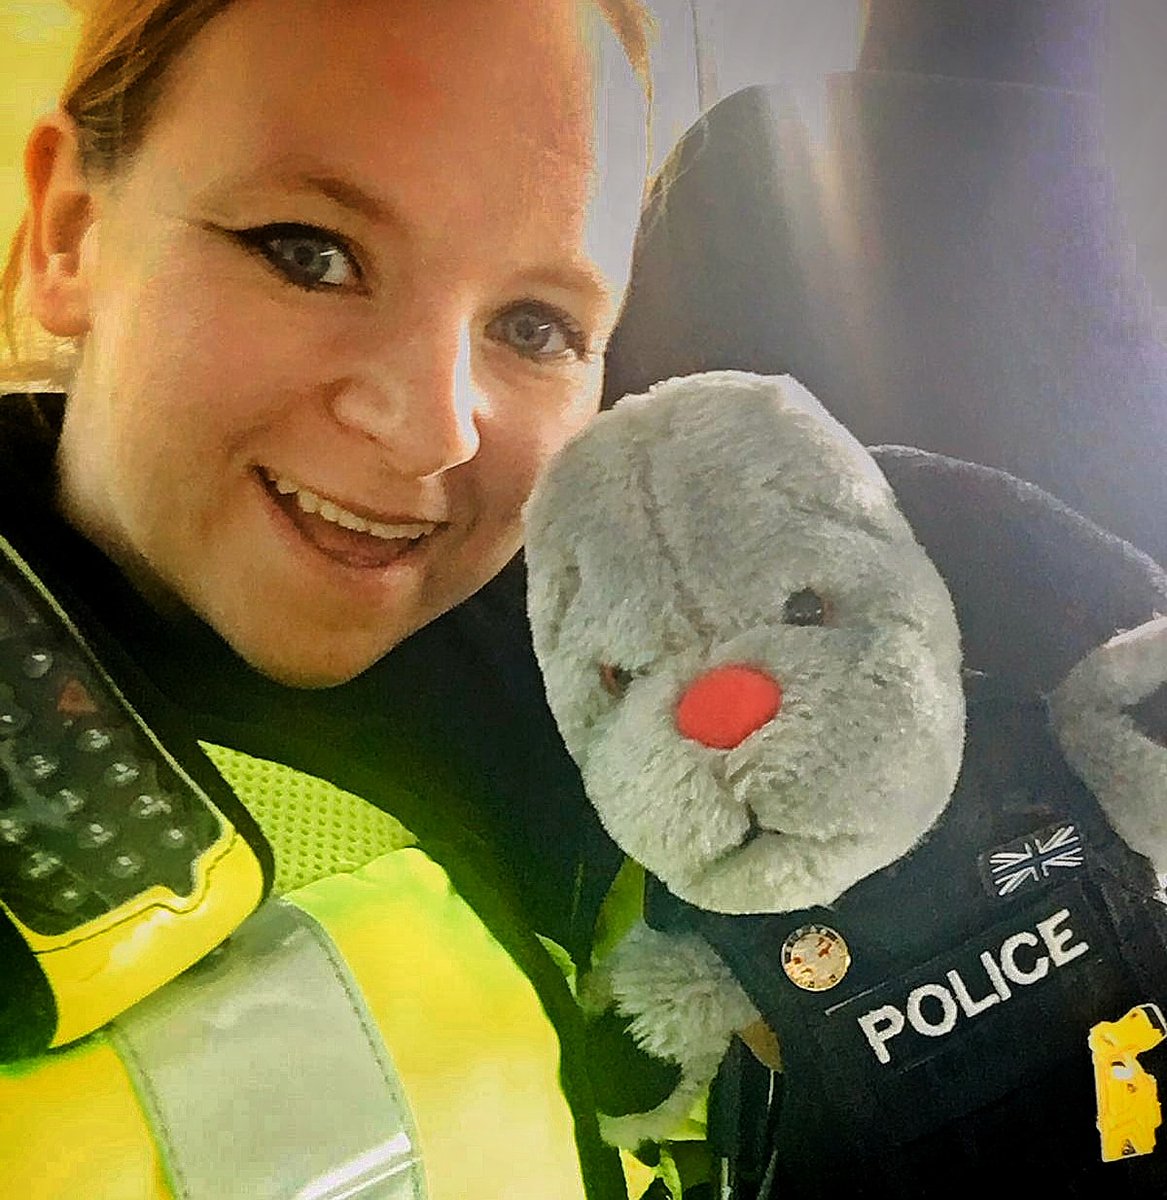 Swoop loves a selfie 👮‍♀️🐶🤳
Out fighting crime today #wearebtp #heretokeepyousafe 👮‍♂️👍